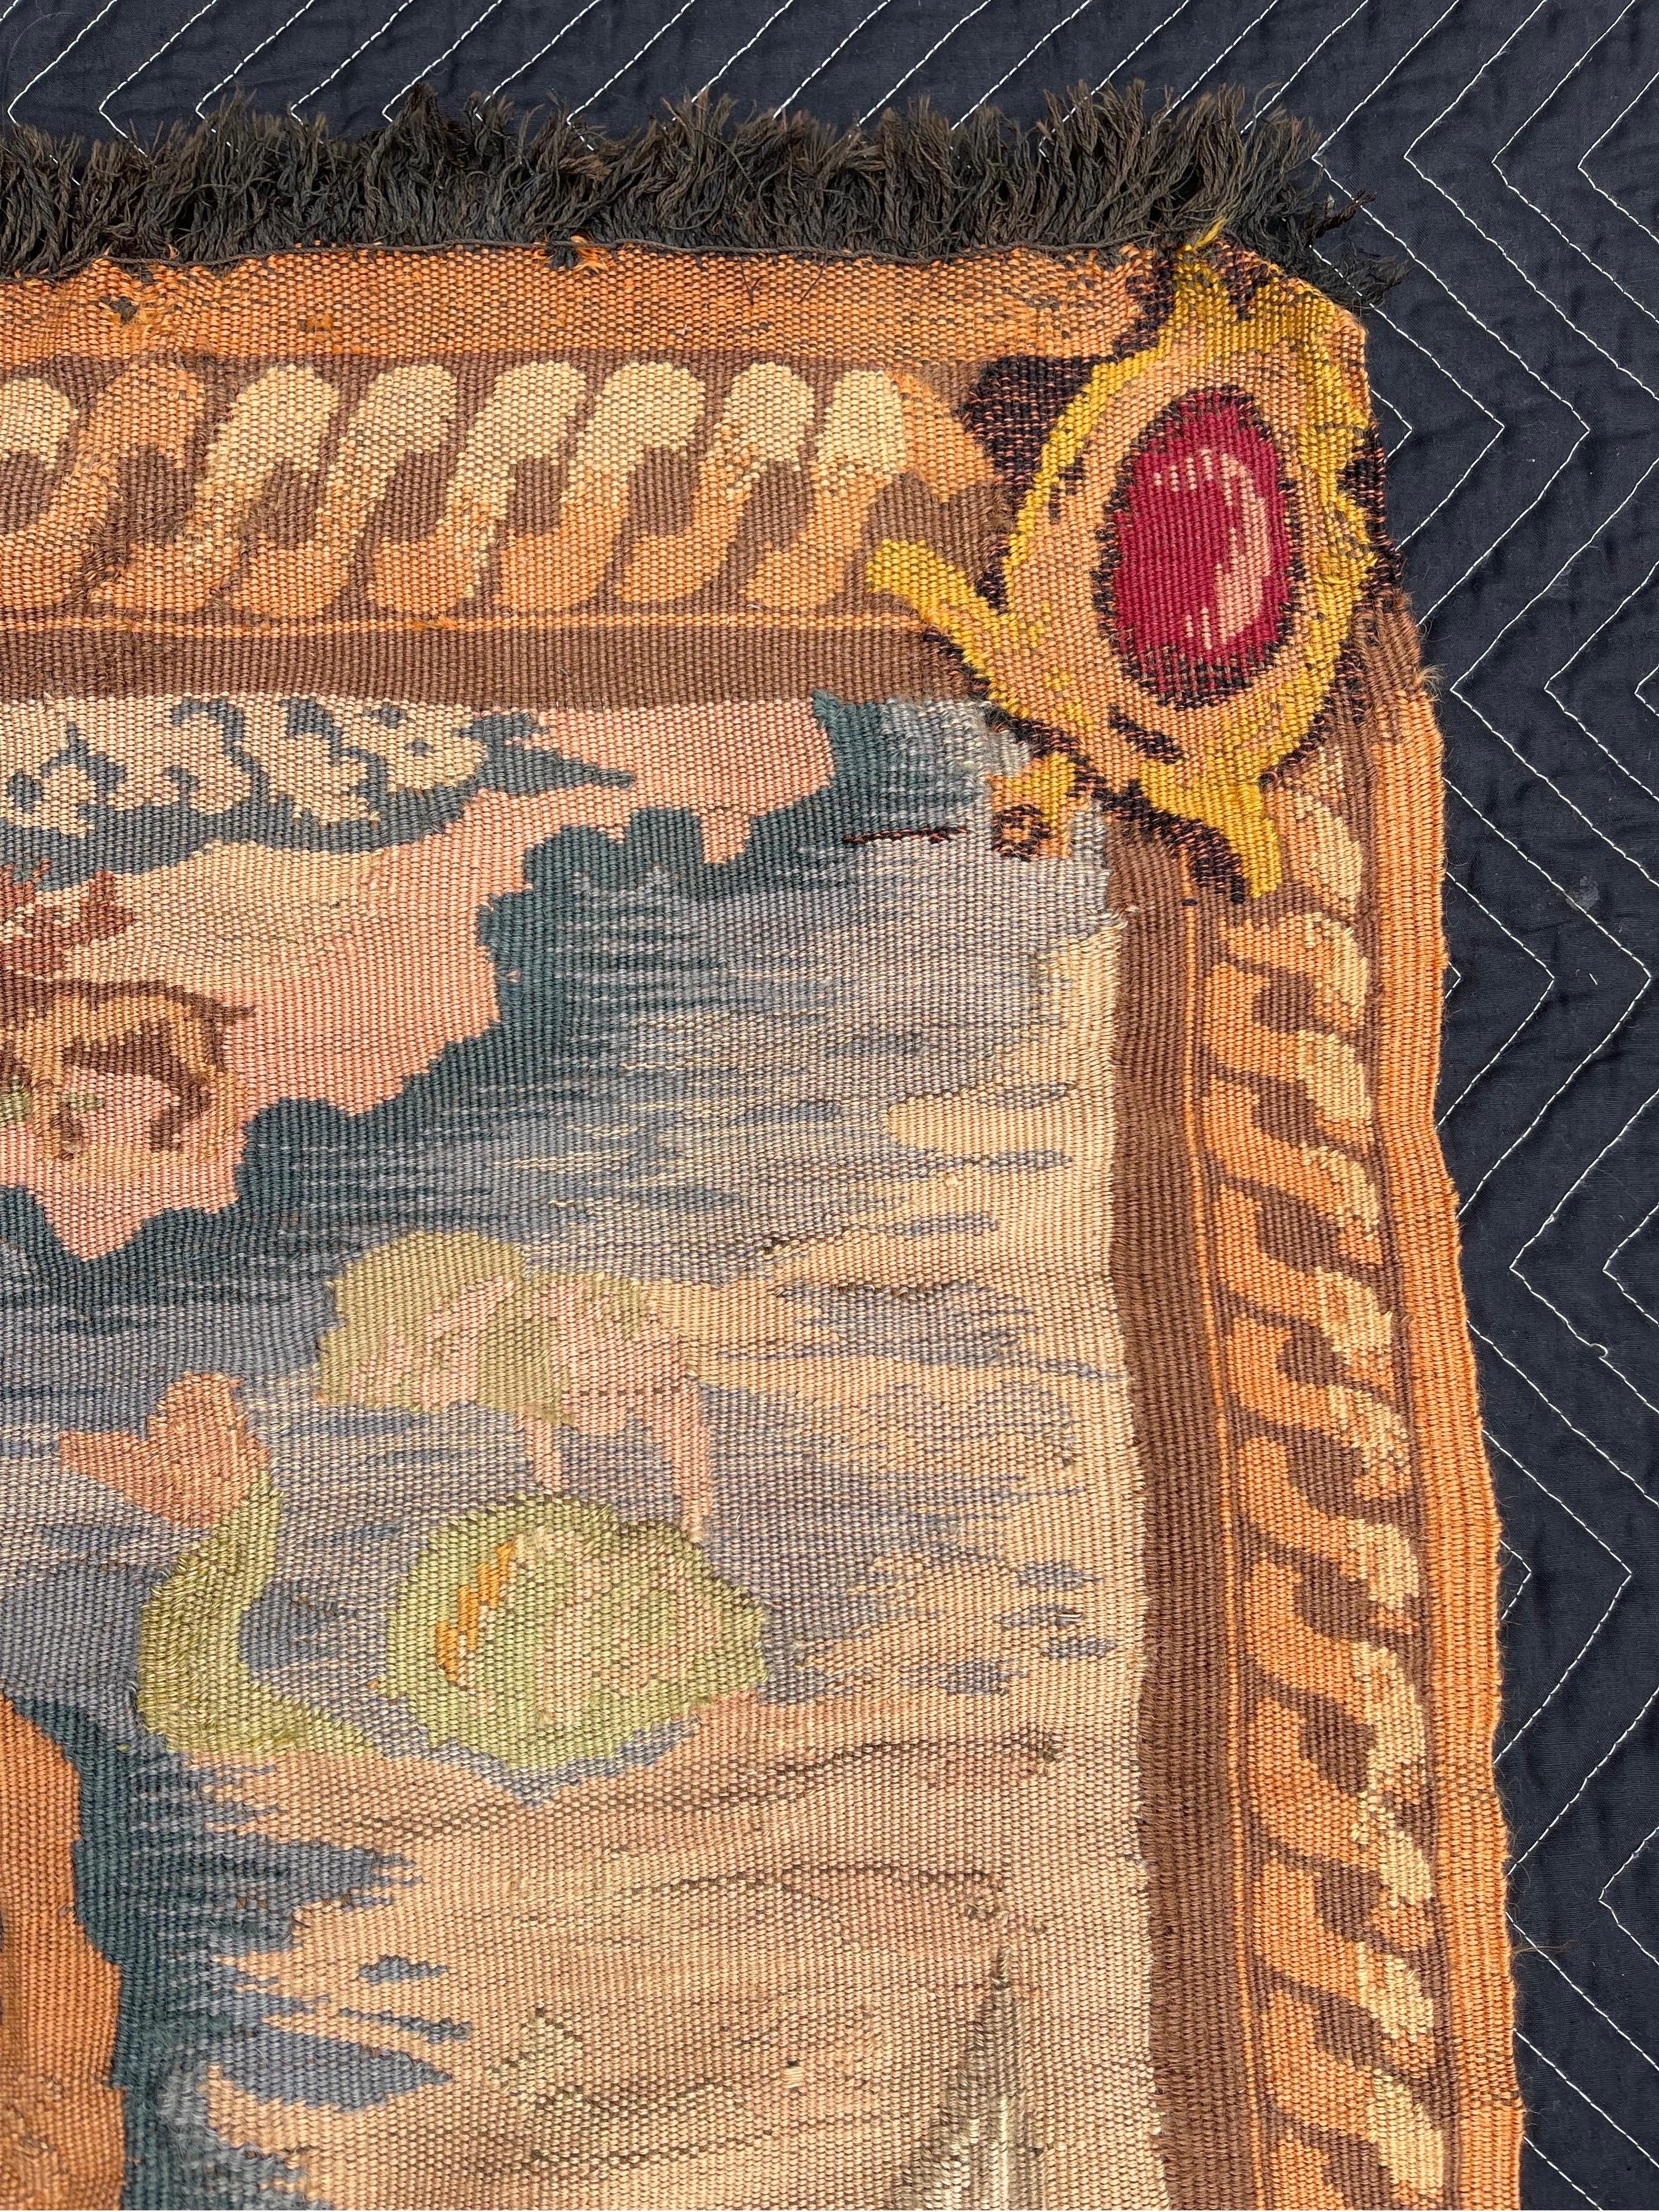 c.1900 Handwoven French Tapestry Map New Netherlands, Amsterdam, 1626 New York For Sale 3